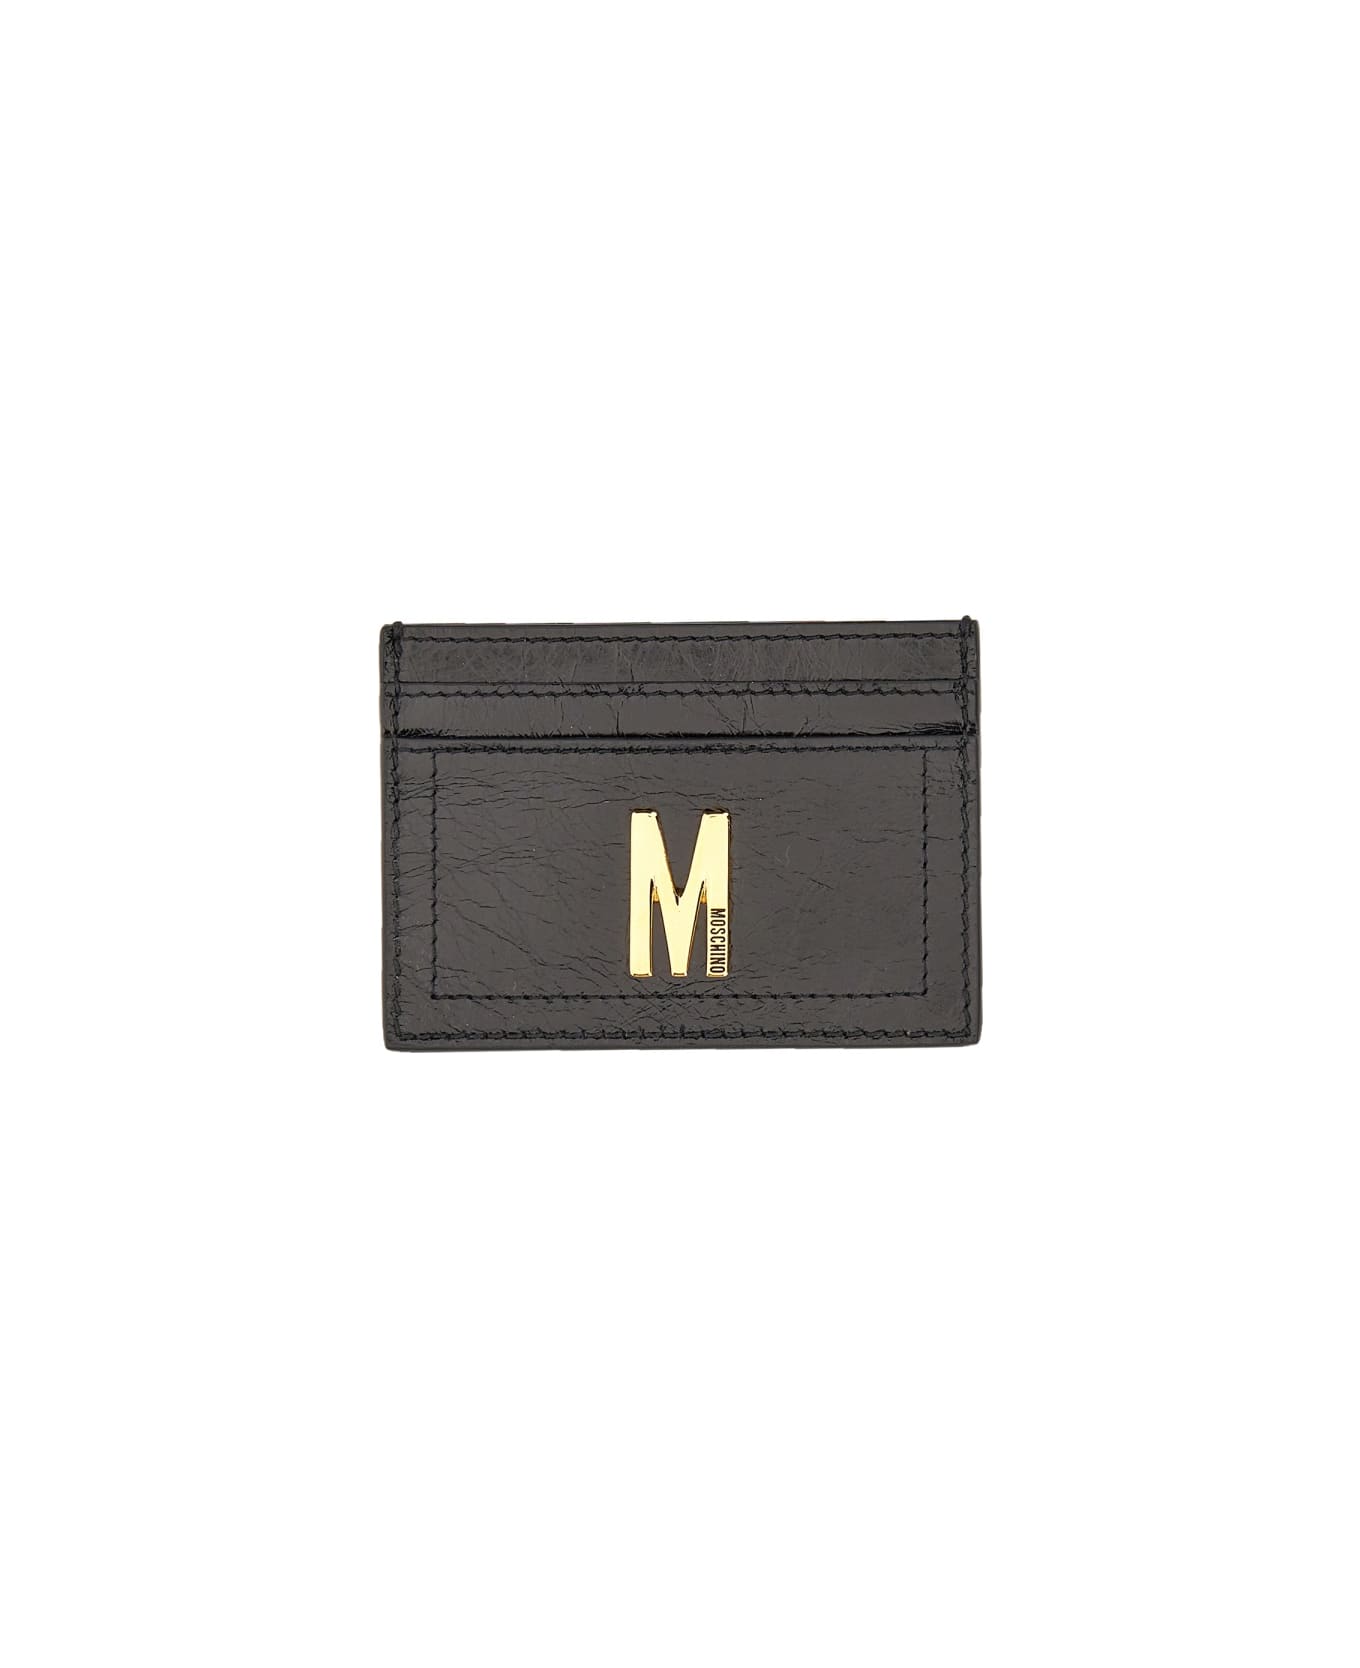 Moschino Card Holder With Gold Plaque - BLACK 財布